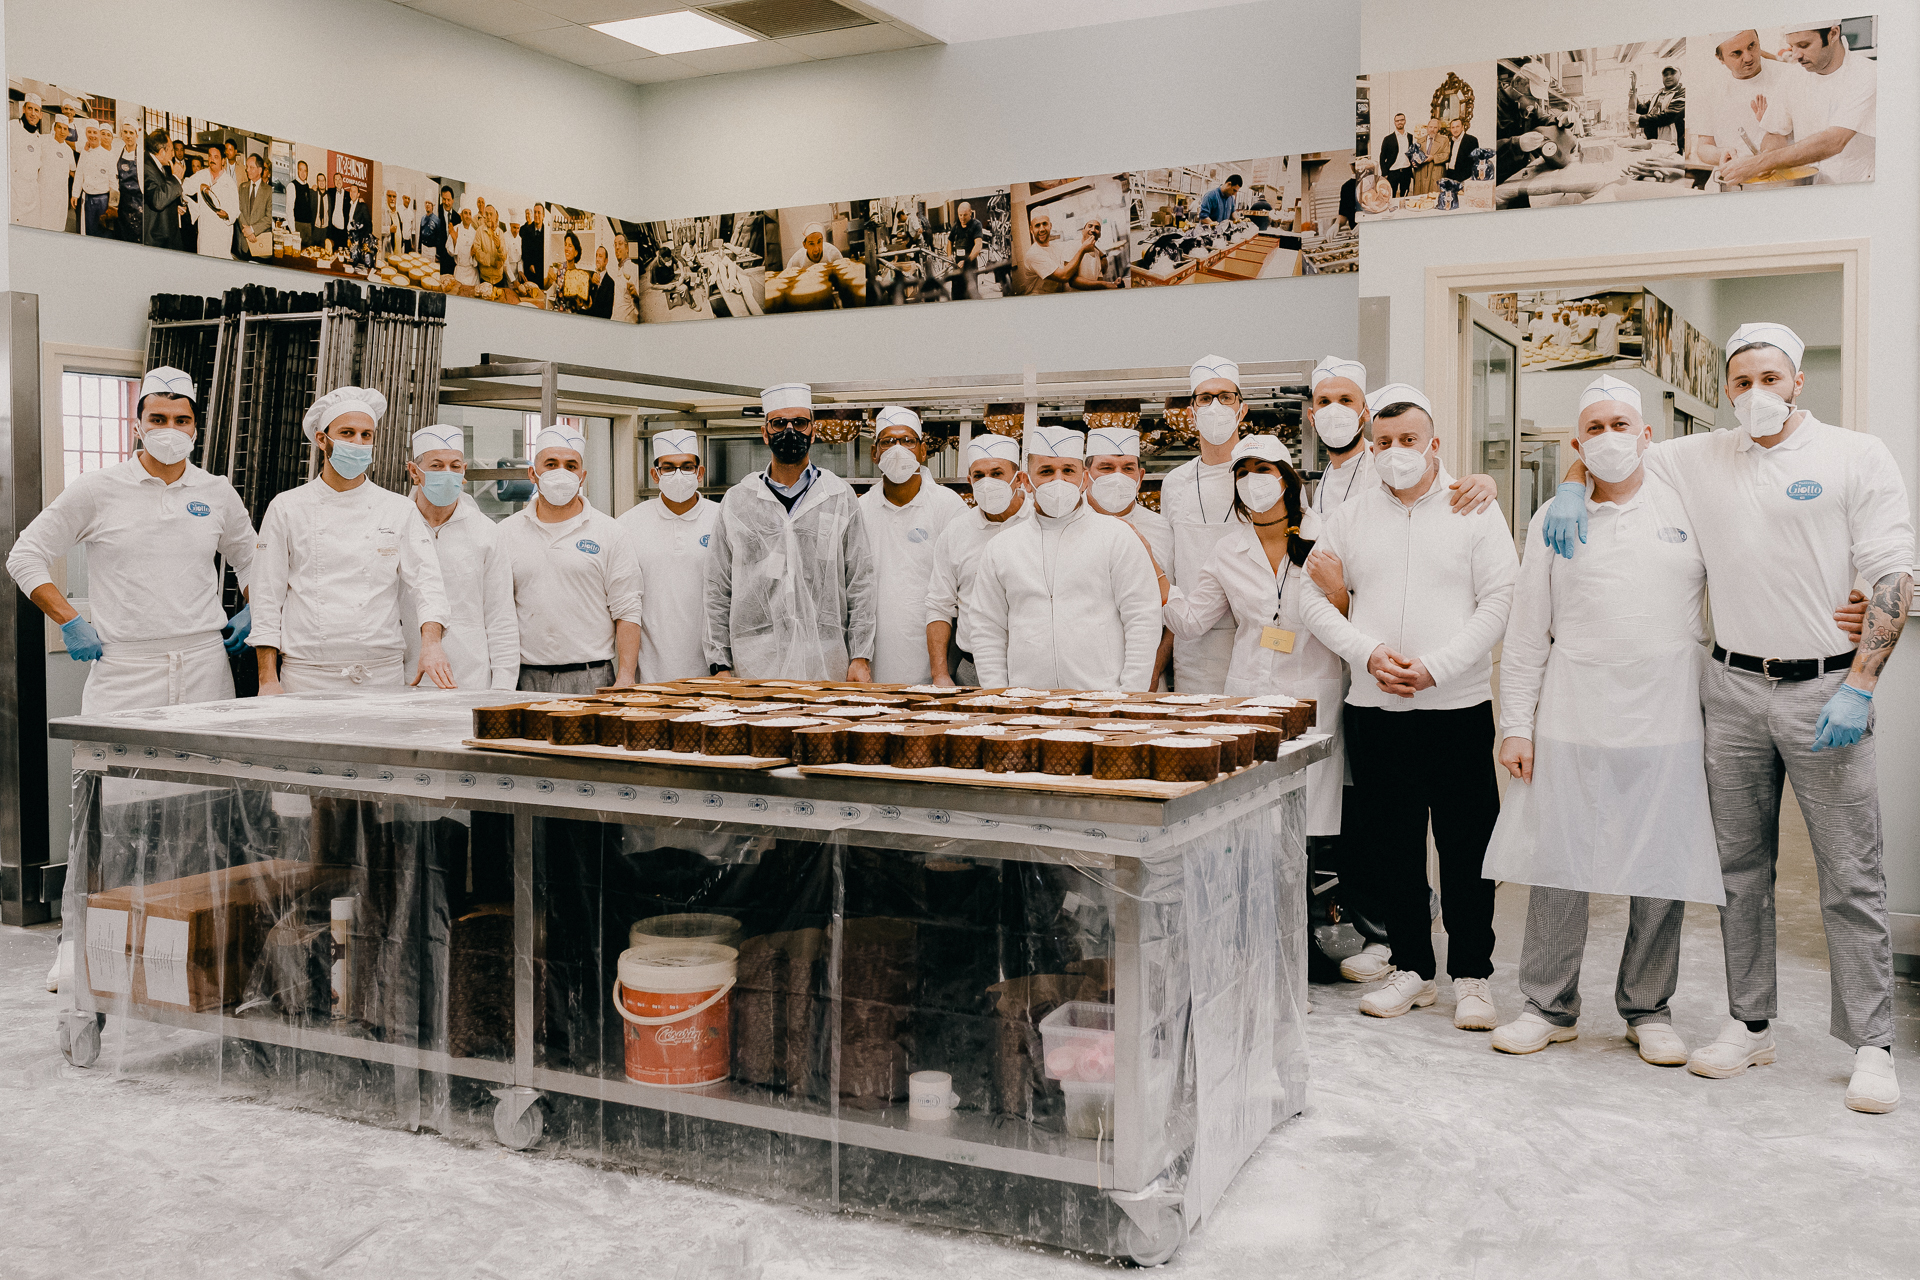 Giotto Bakery – A group picture of 15 men and one woman, standing side by side and hugging